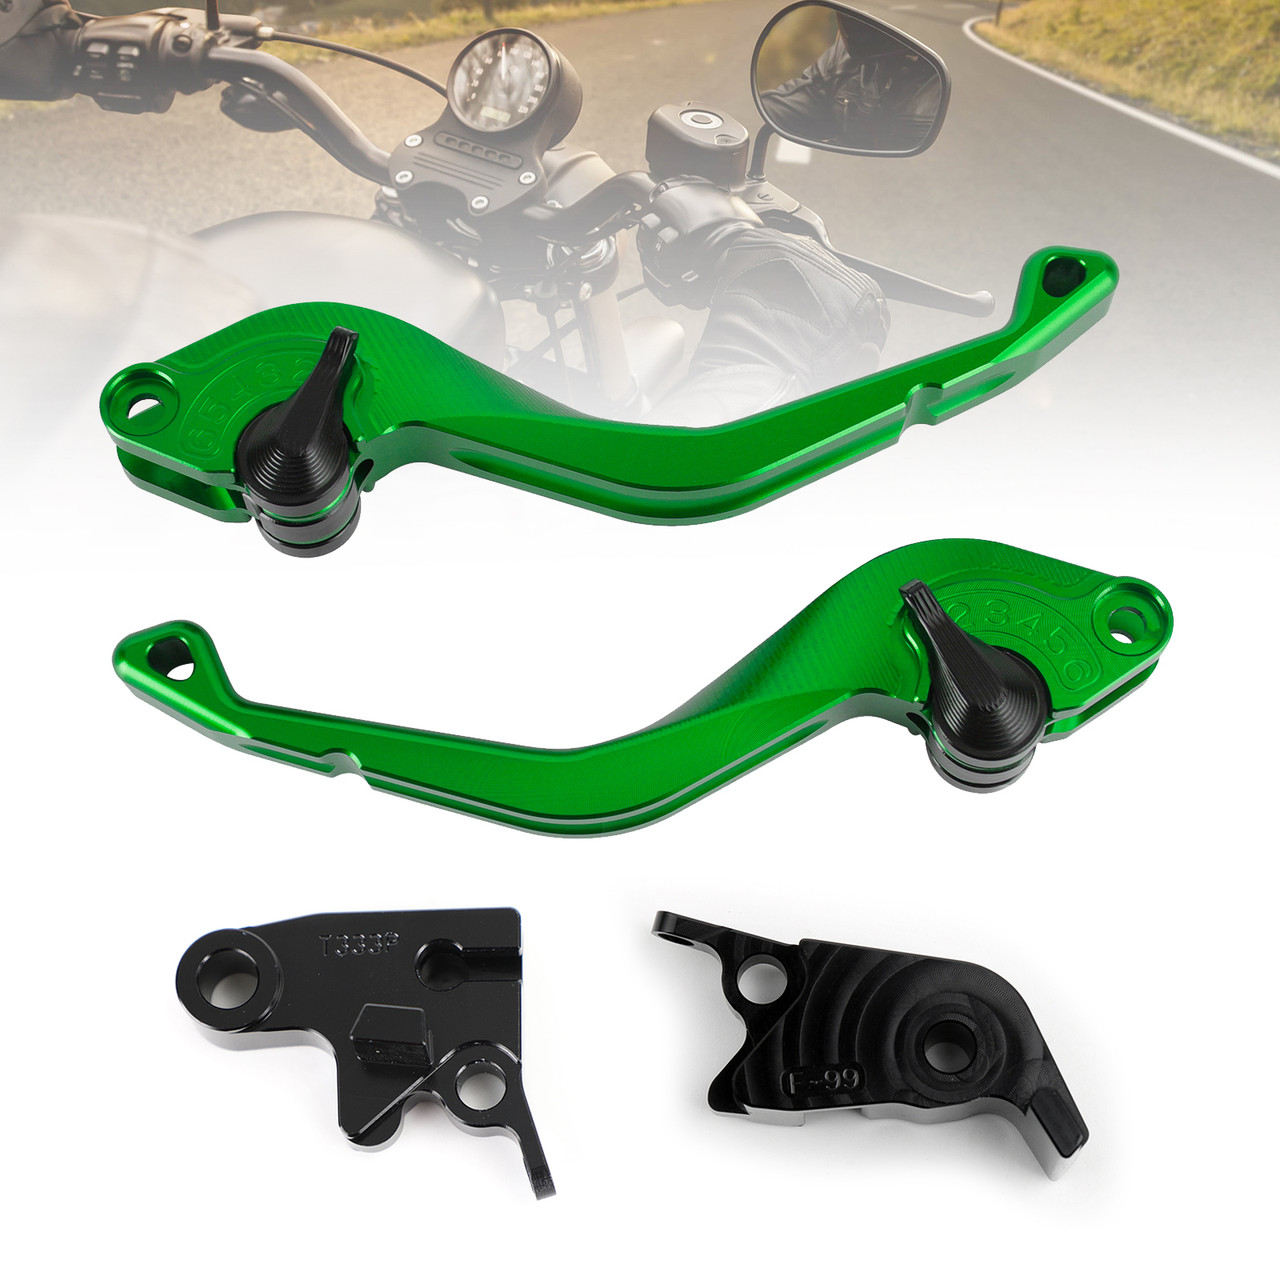 CNC Short Clutch Brake Lever fit for Speed Triple R 1050/S 765 R